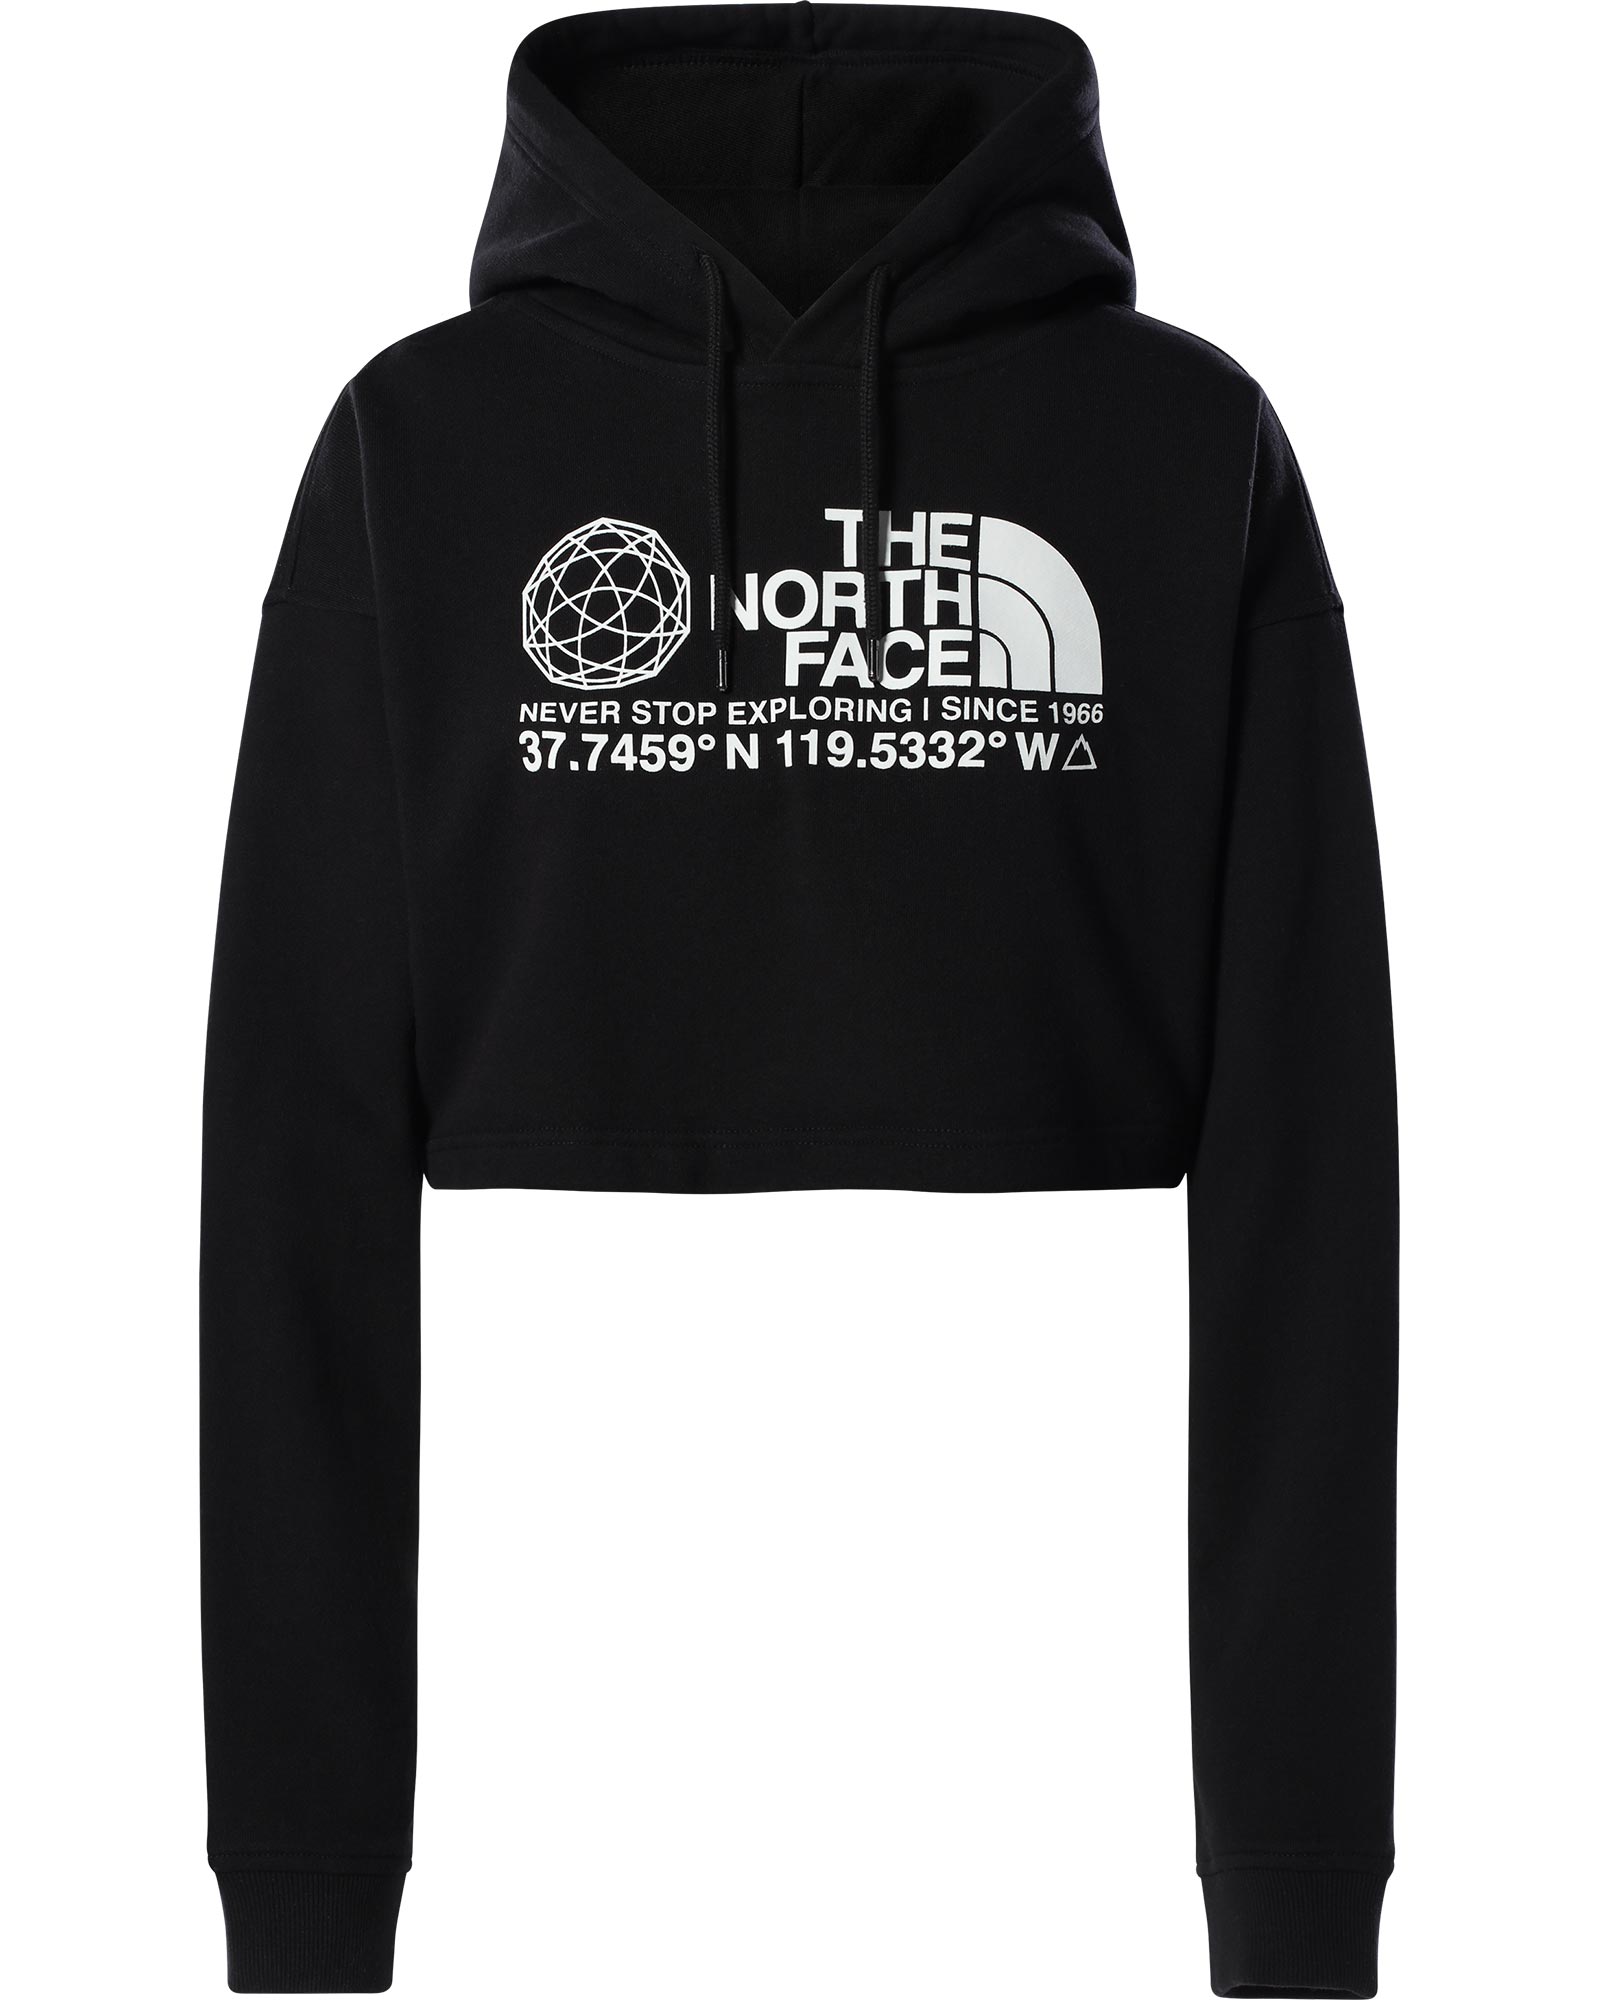 The North Face Coordinates Crop Drop Pullover Women’s Hoodie - TNF Black L